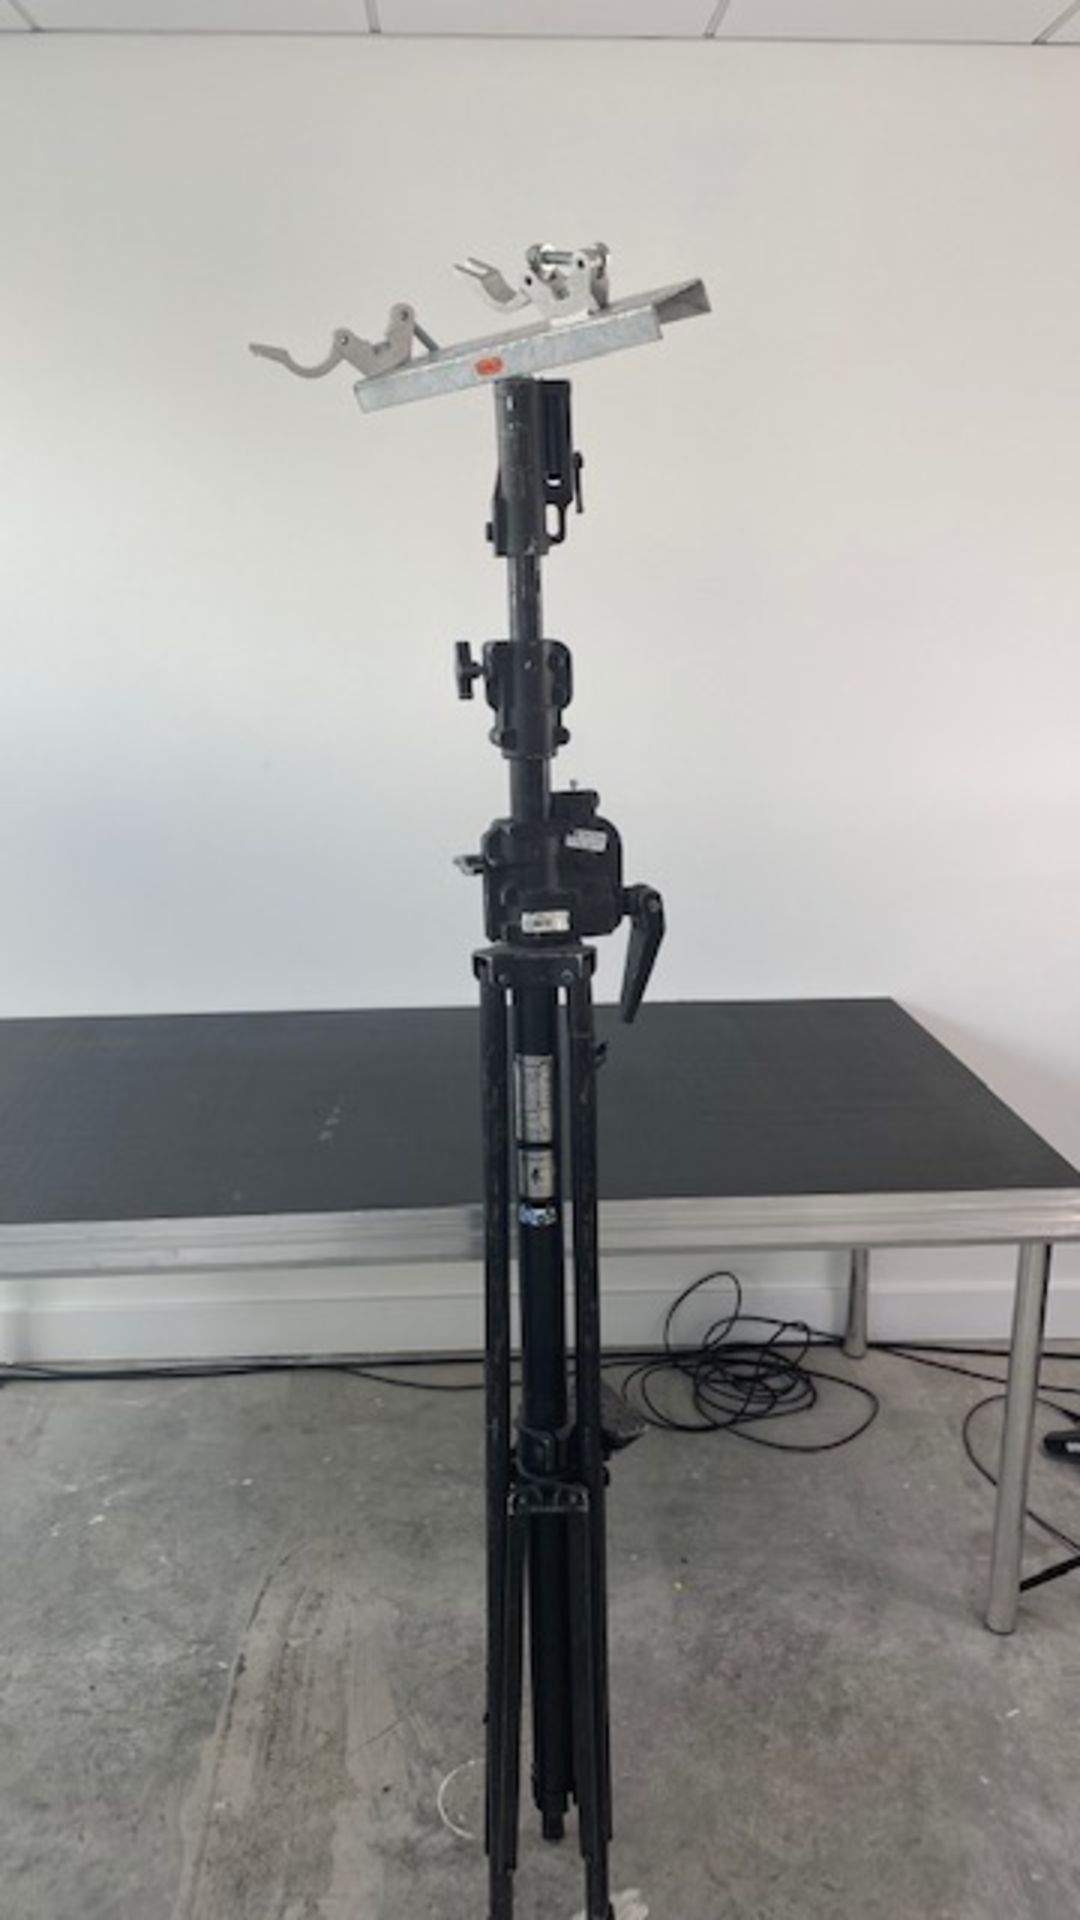 1 x Doughty EasyLift T55511 Lighting Stand - Ref: 900 - CL581 - Location: Altrincham WA14 - Image 2 of 3